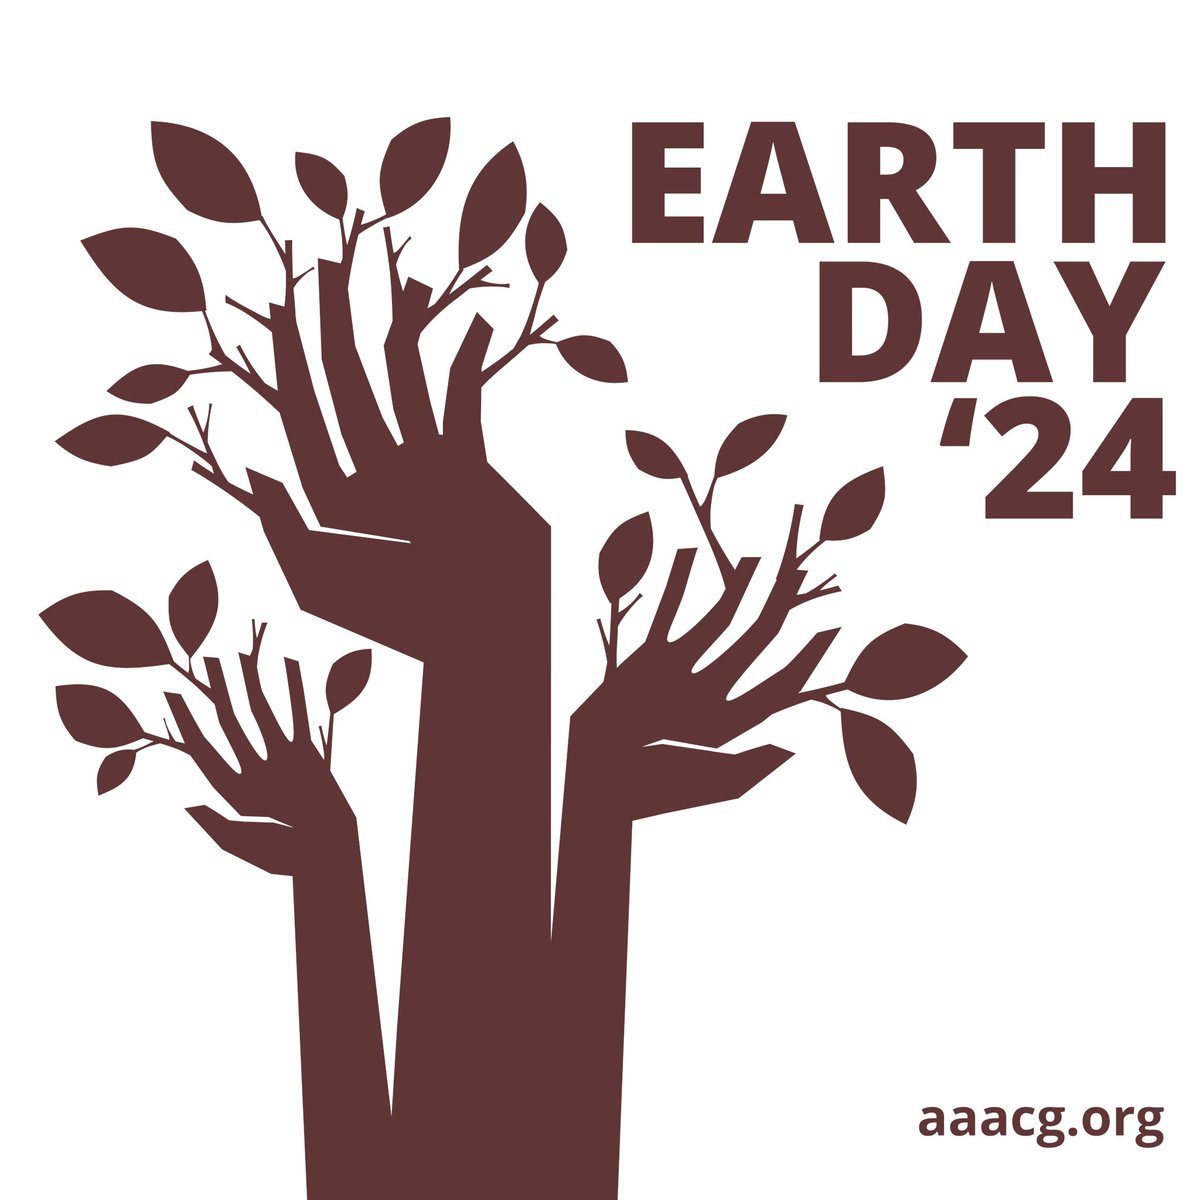 Happy Earth Day everyone! Plant a seed, water a plant, or just go outside and be thankful for the beauty of Mother Nature!
#earthday #aaacgcle #blackamerican #blackhistory #cle #cleveland #culture #culturalgardens #gardening #heritage #legacy #plants #thisiscle #thisiscleveland